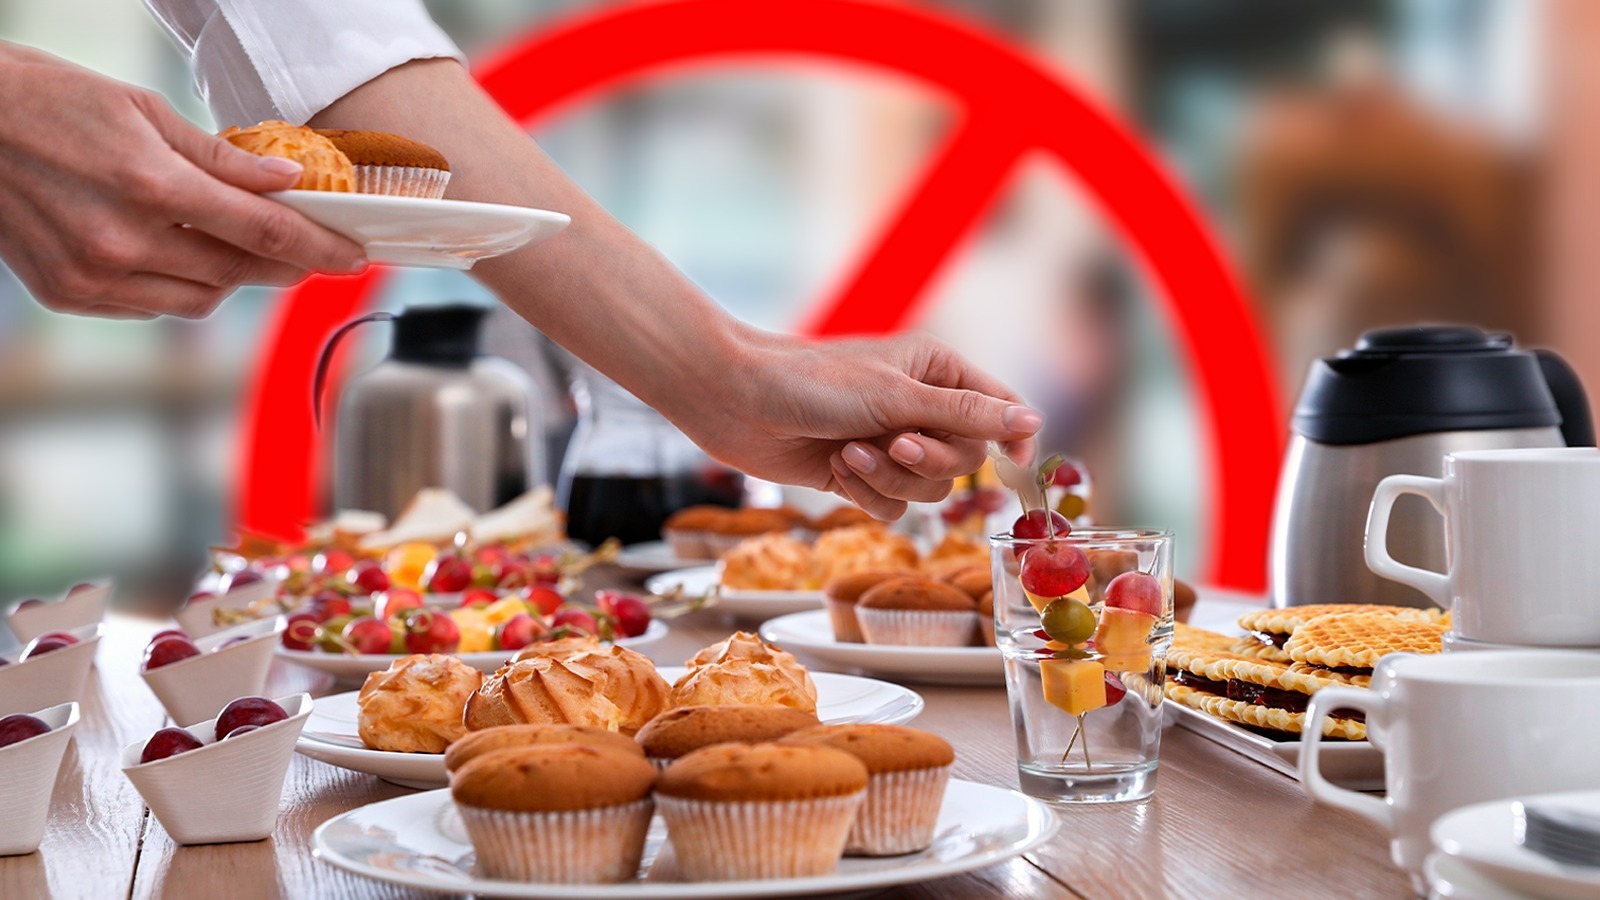 https://www.thedailymeal.com/img/gallery/17-mistakes-people-make-at-the-hotel-breakfast-buffet/l-intro-1684925147.jpg